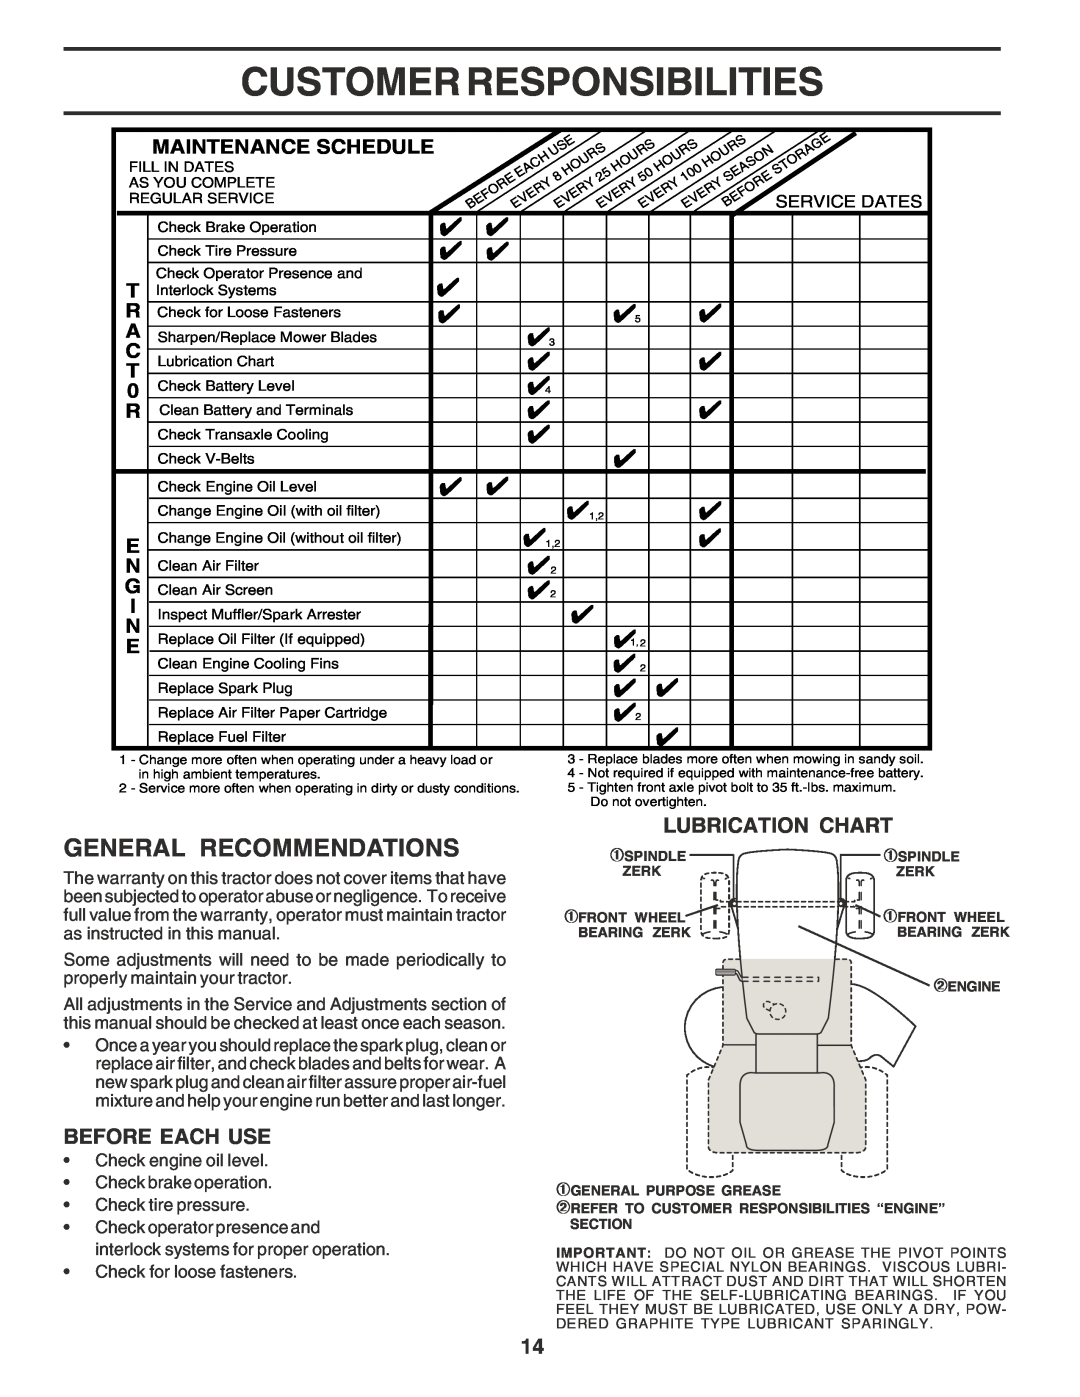 Poulan PO1538B manual Customer Responsibilities, General Recommendations, Before Each Use, Lubrication Chart 